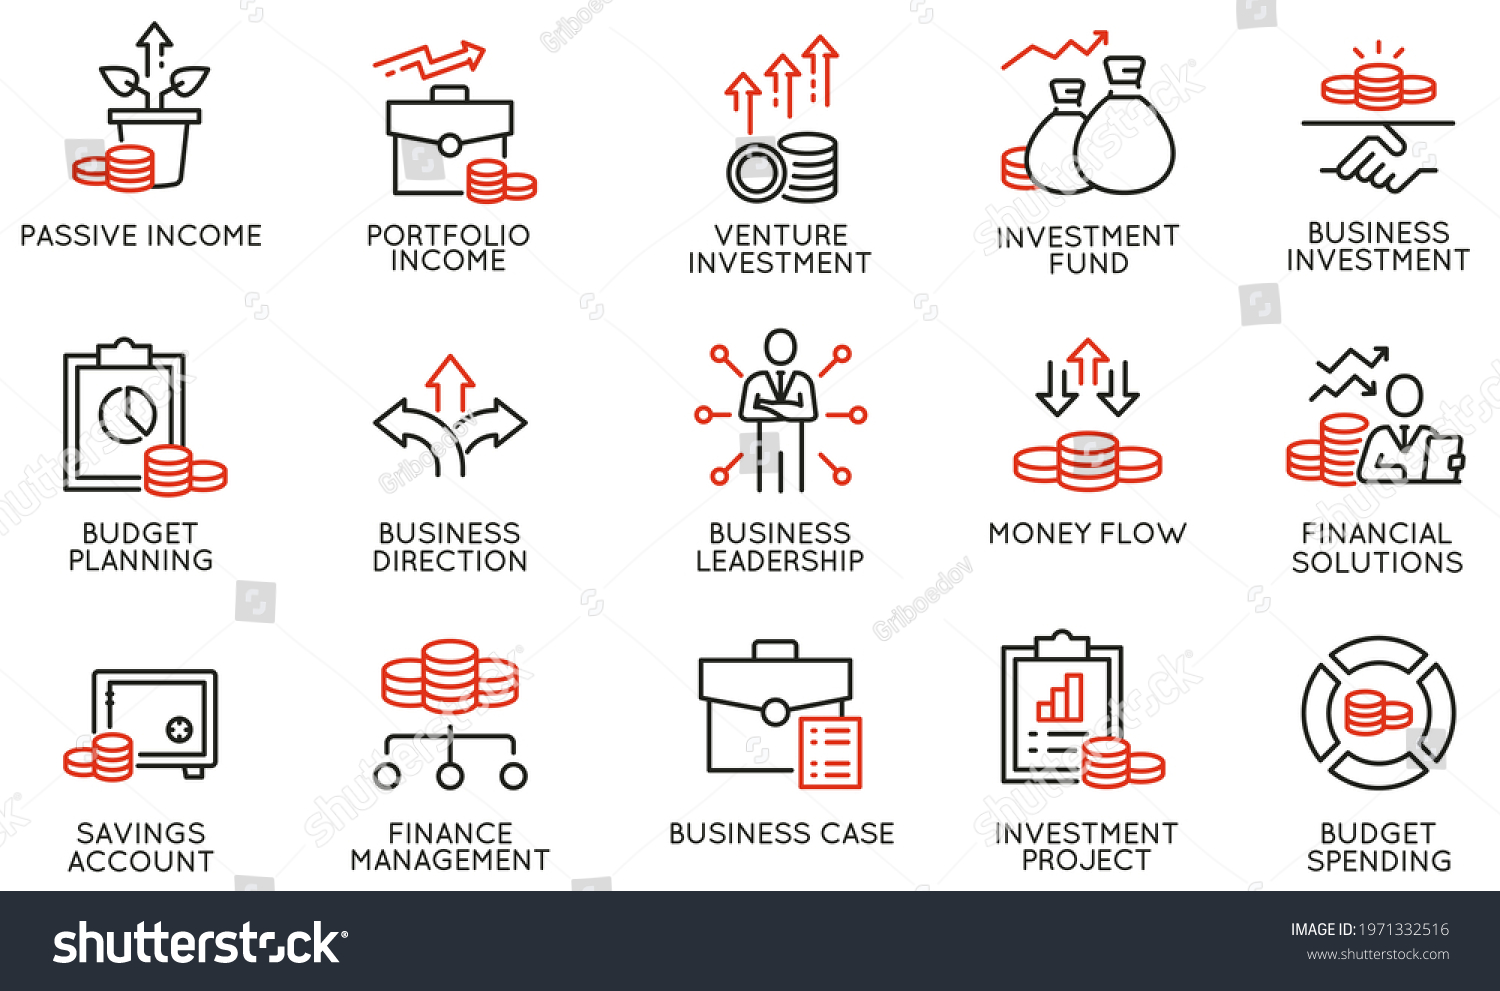 SVG of Vector Set of Linear Icons Related to Business investment, Trade Service, Investment Strategy and Finance Manegement. Mono Line Pictograms and Infographics Design Elements svg